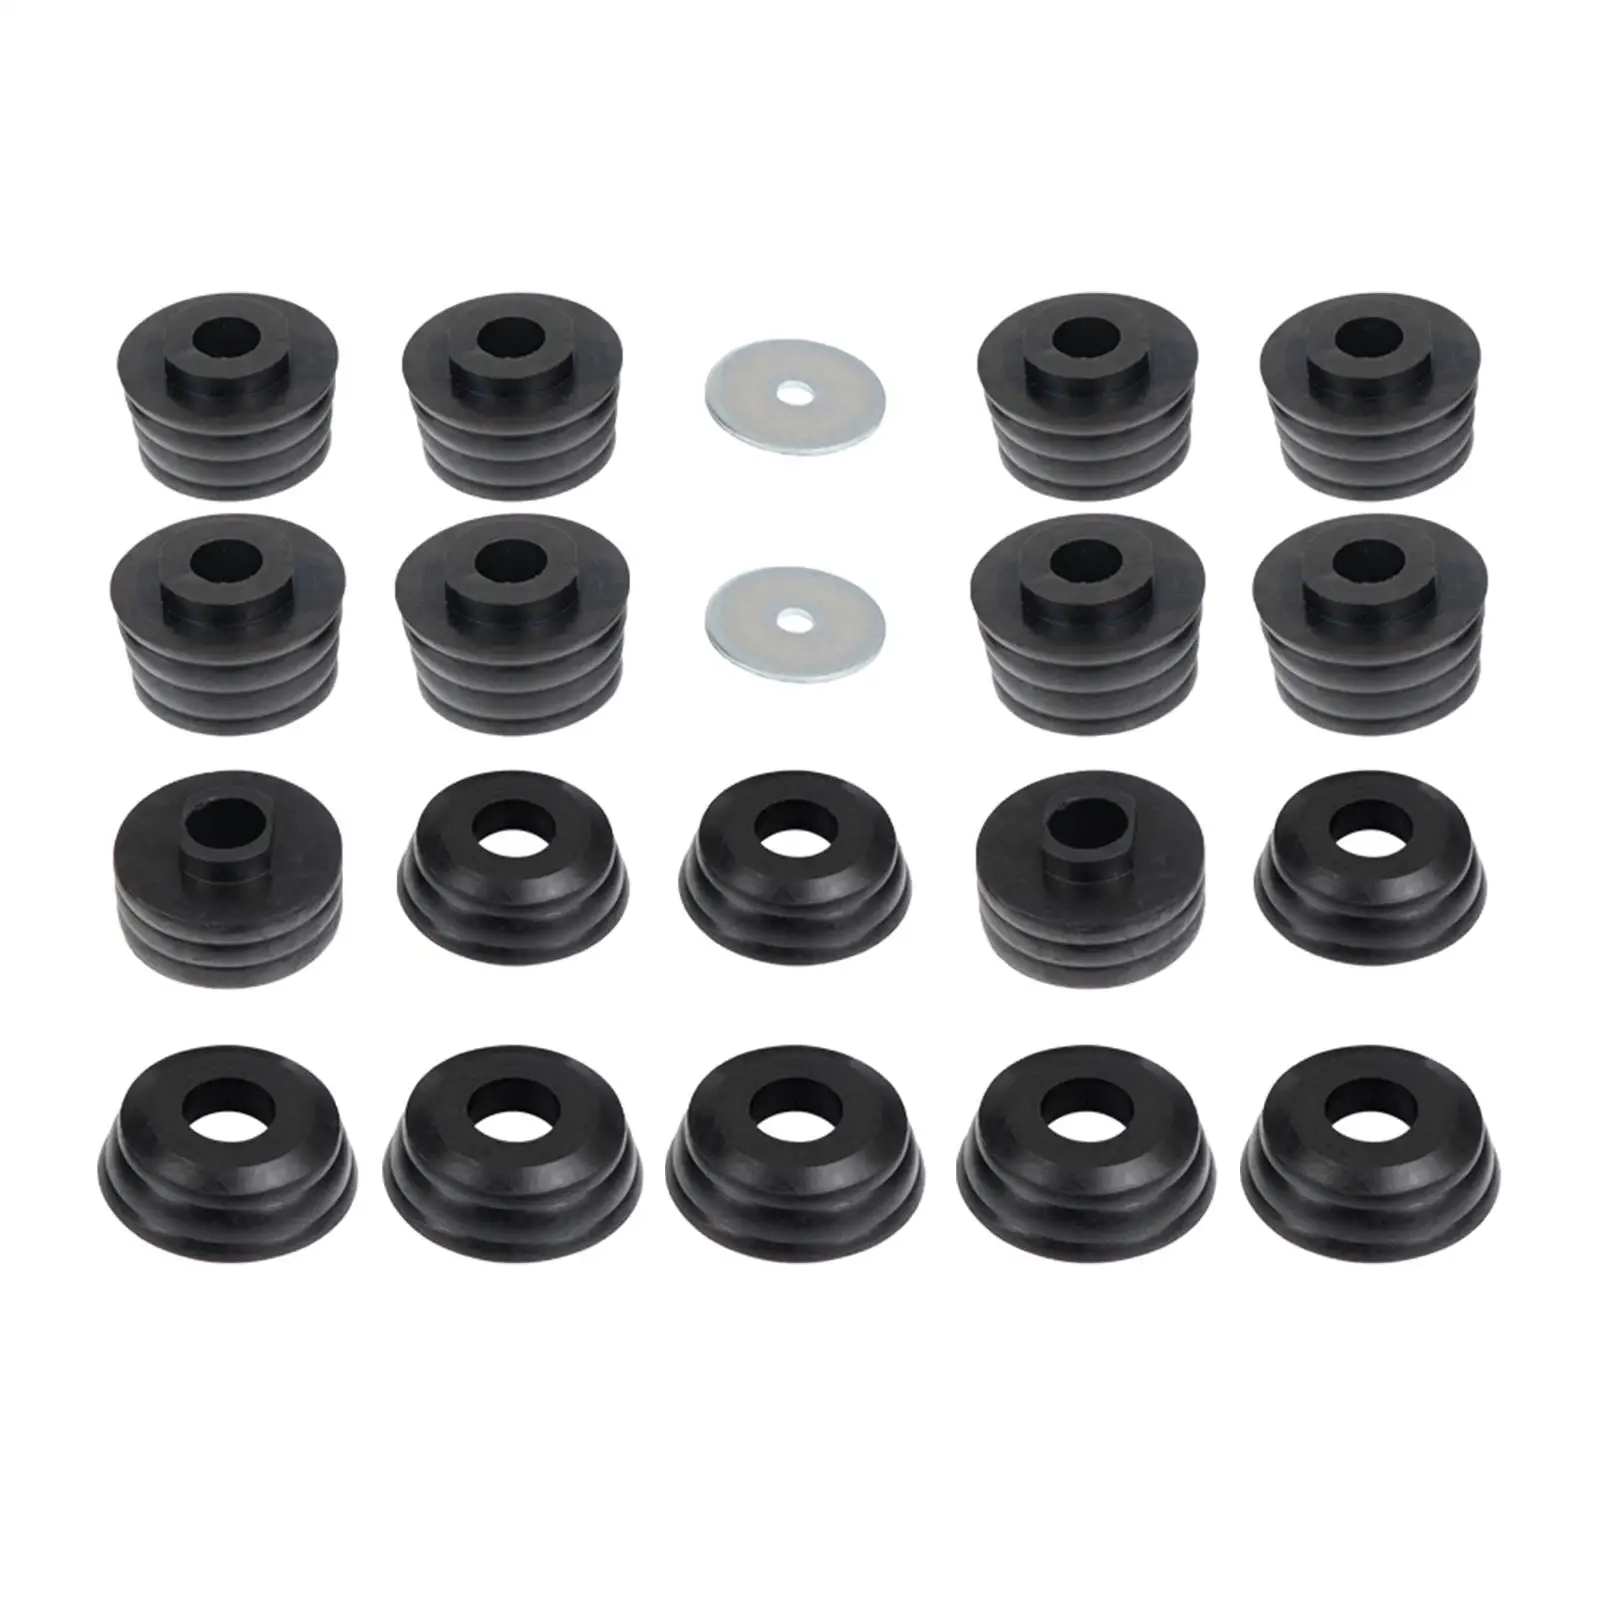 Body Cab Bushings Wear Resistant Professional Body Cab Mounts for GMC Sierra 1500 2500 2WD 4WD 1999-2014 Accessory Replaces